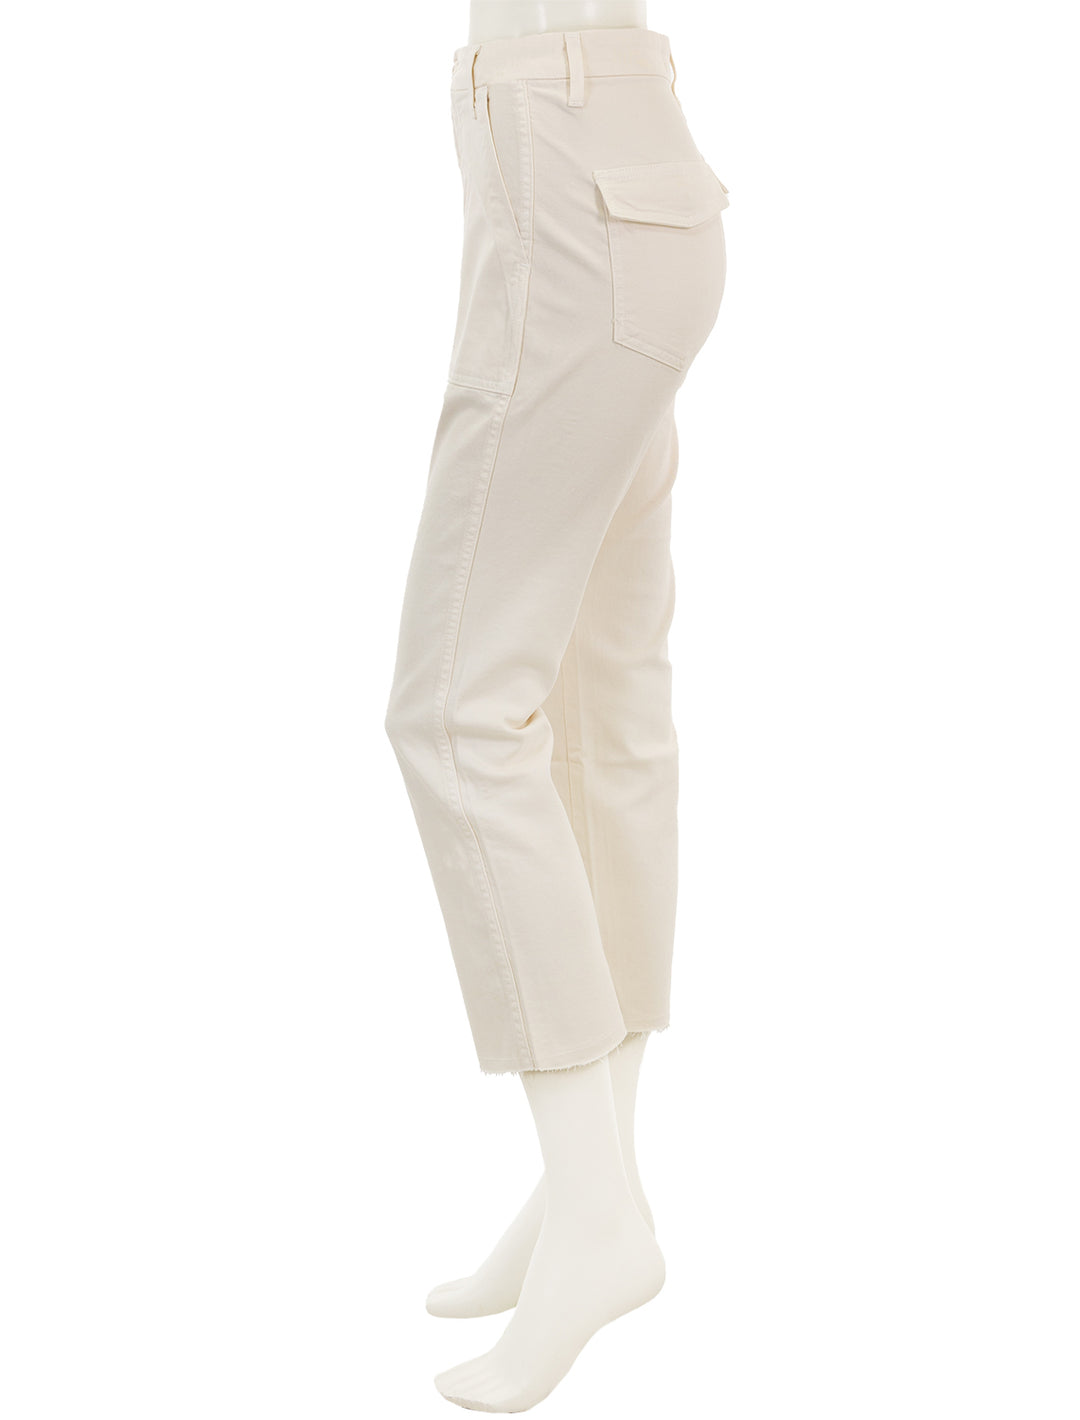 Side view of AMO's easy army trousers in bone.